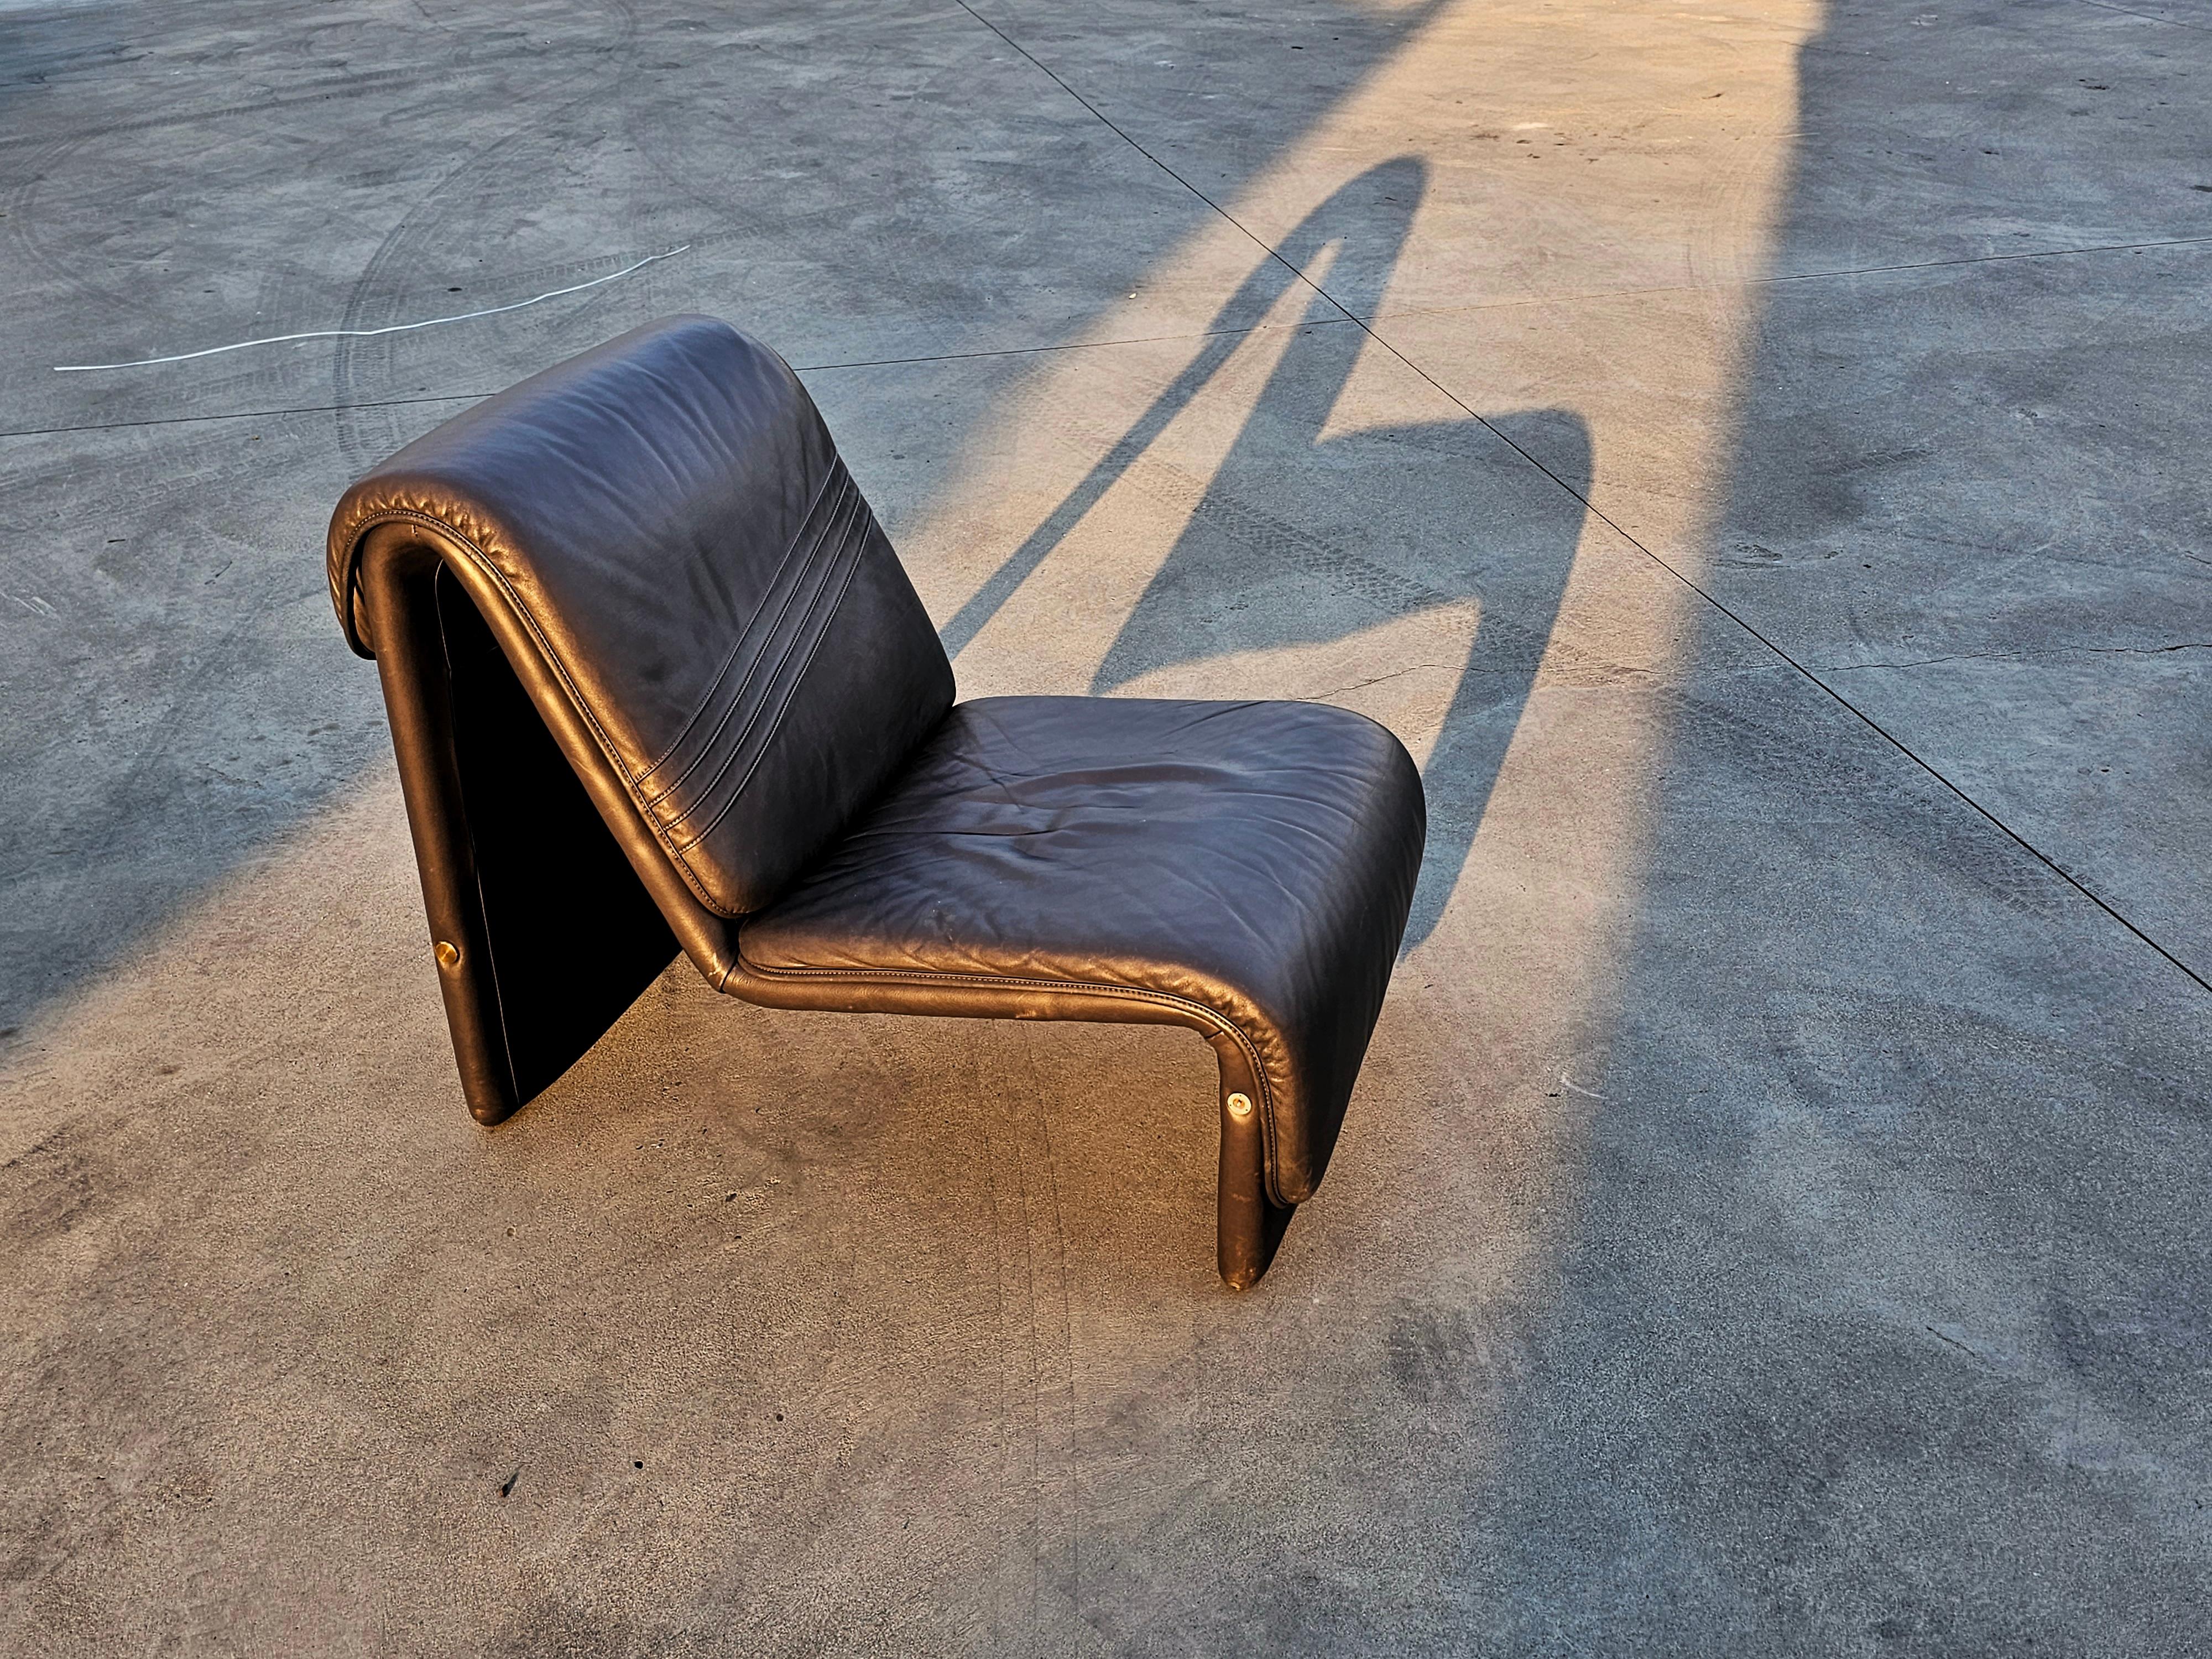 Postmodern Leather Lounge Chairs in style of Etienne Fermigier, Switzerland 1978 For Sale 3